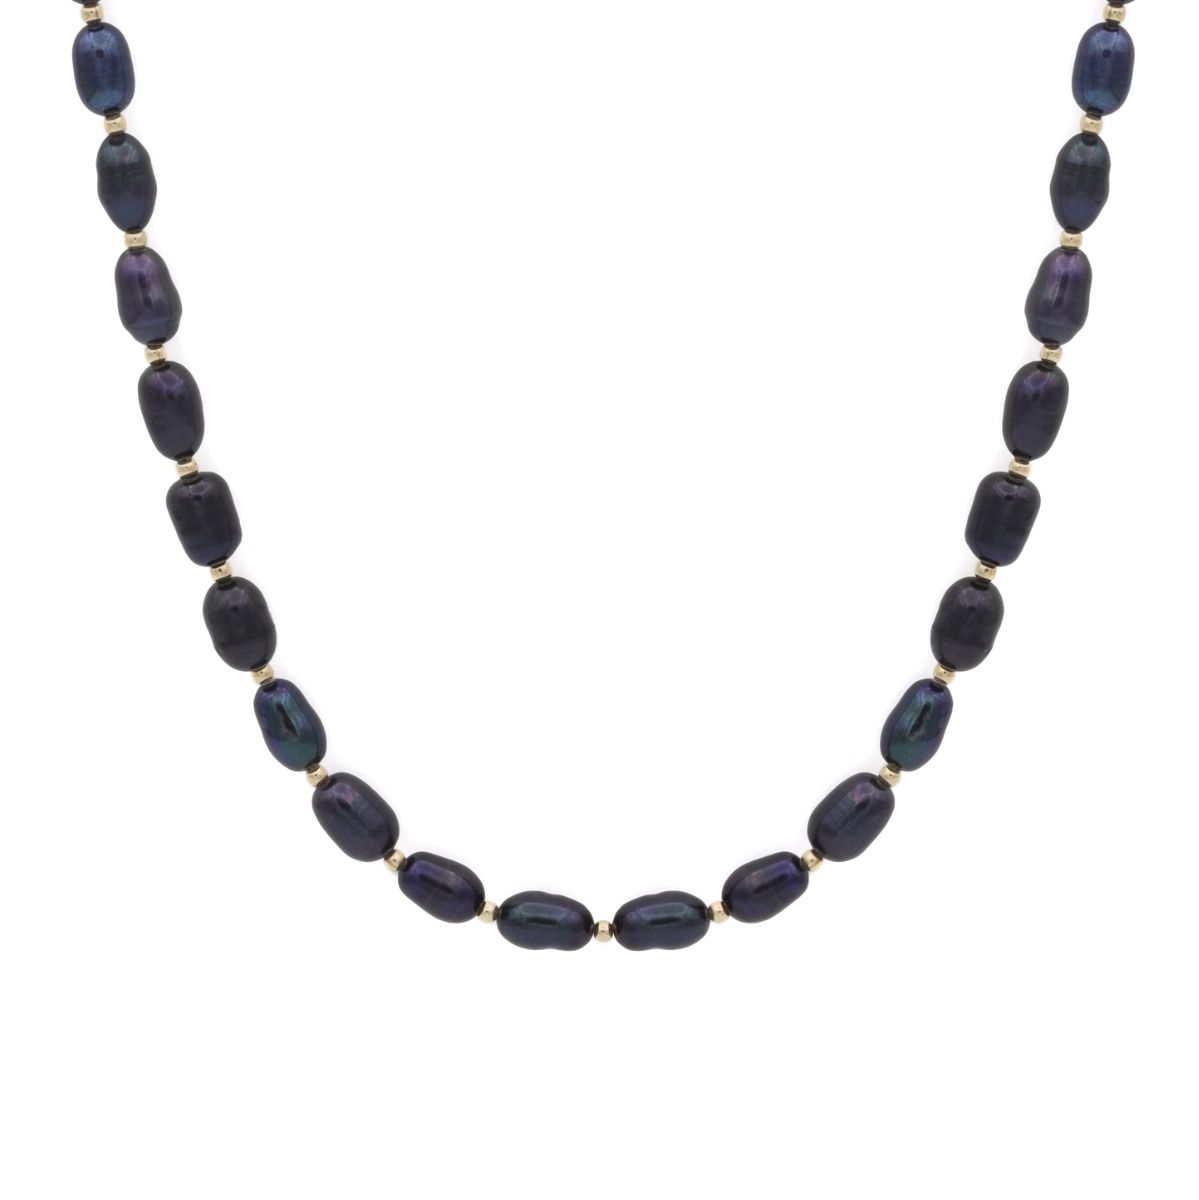 Black Pearl Necklace with Beads for Women - Talisa